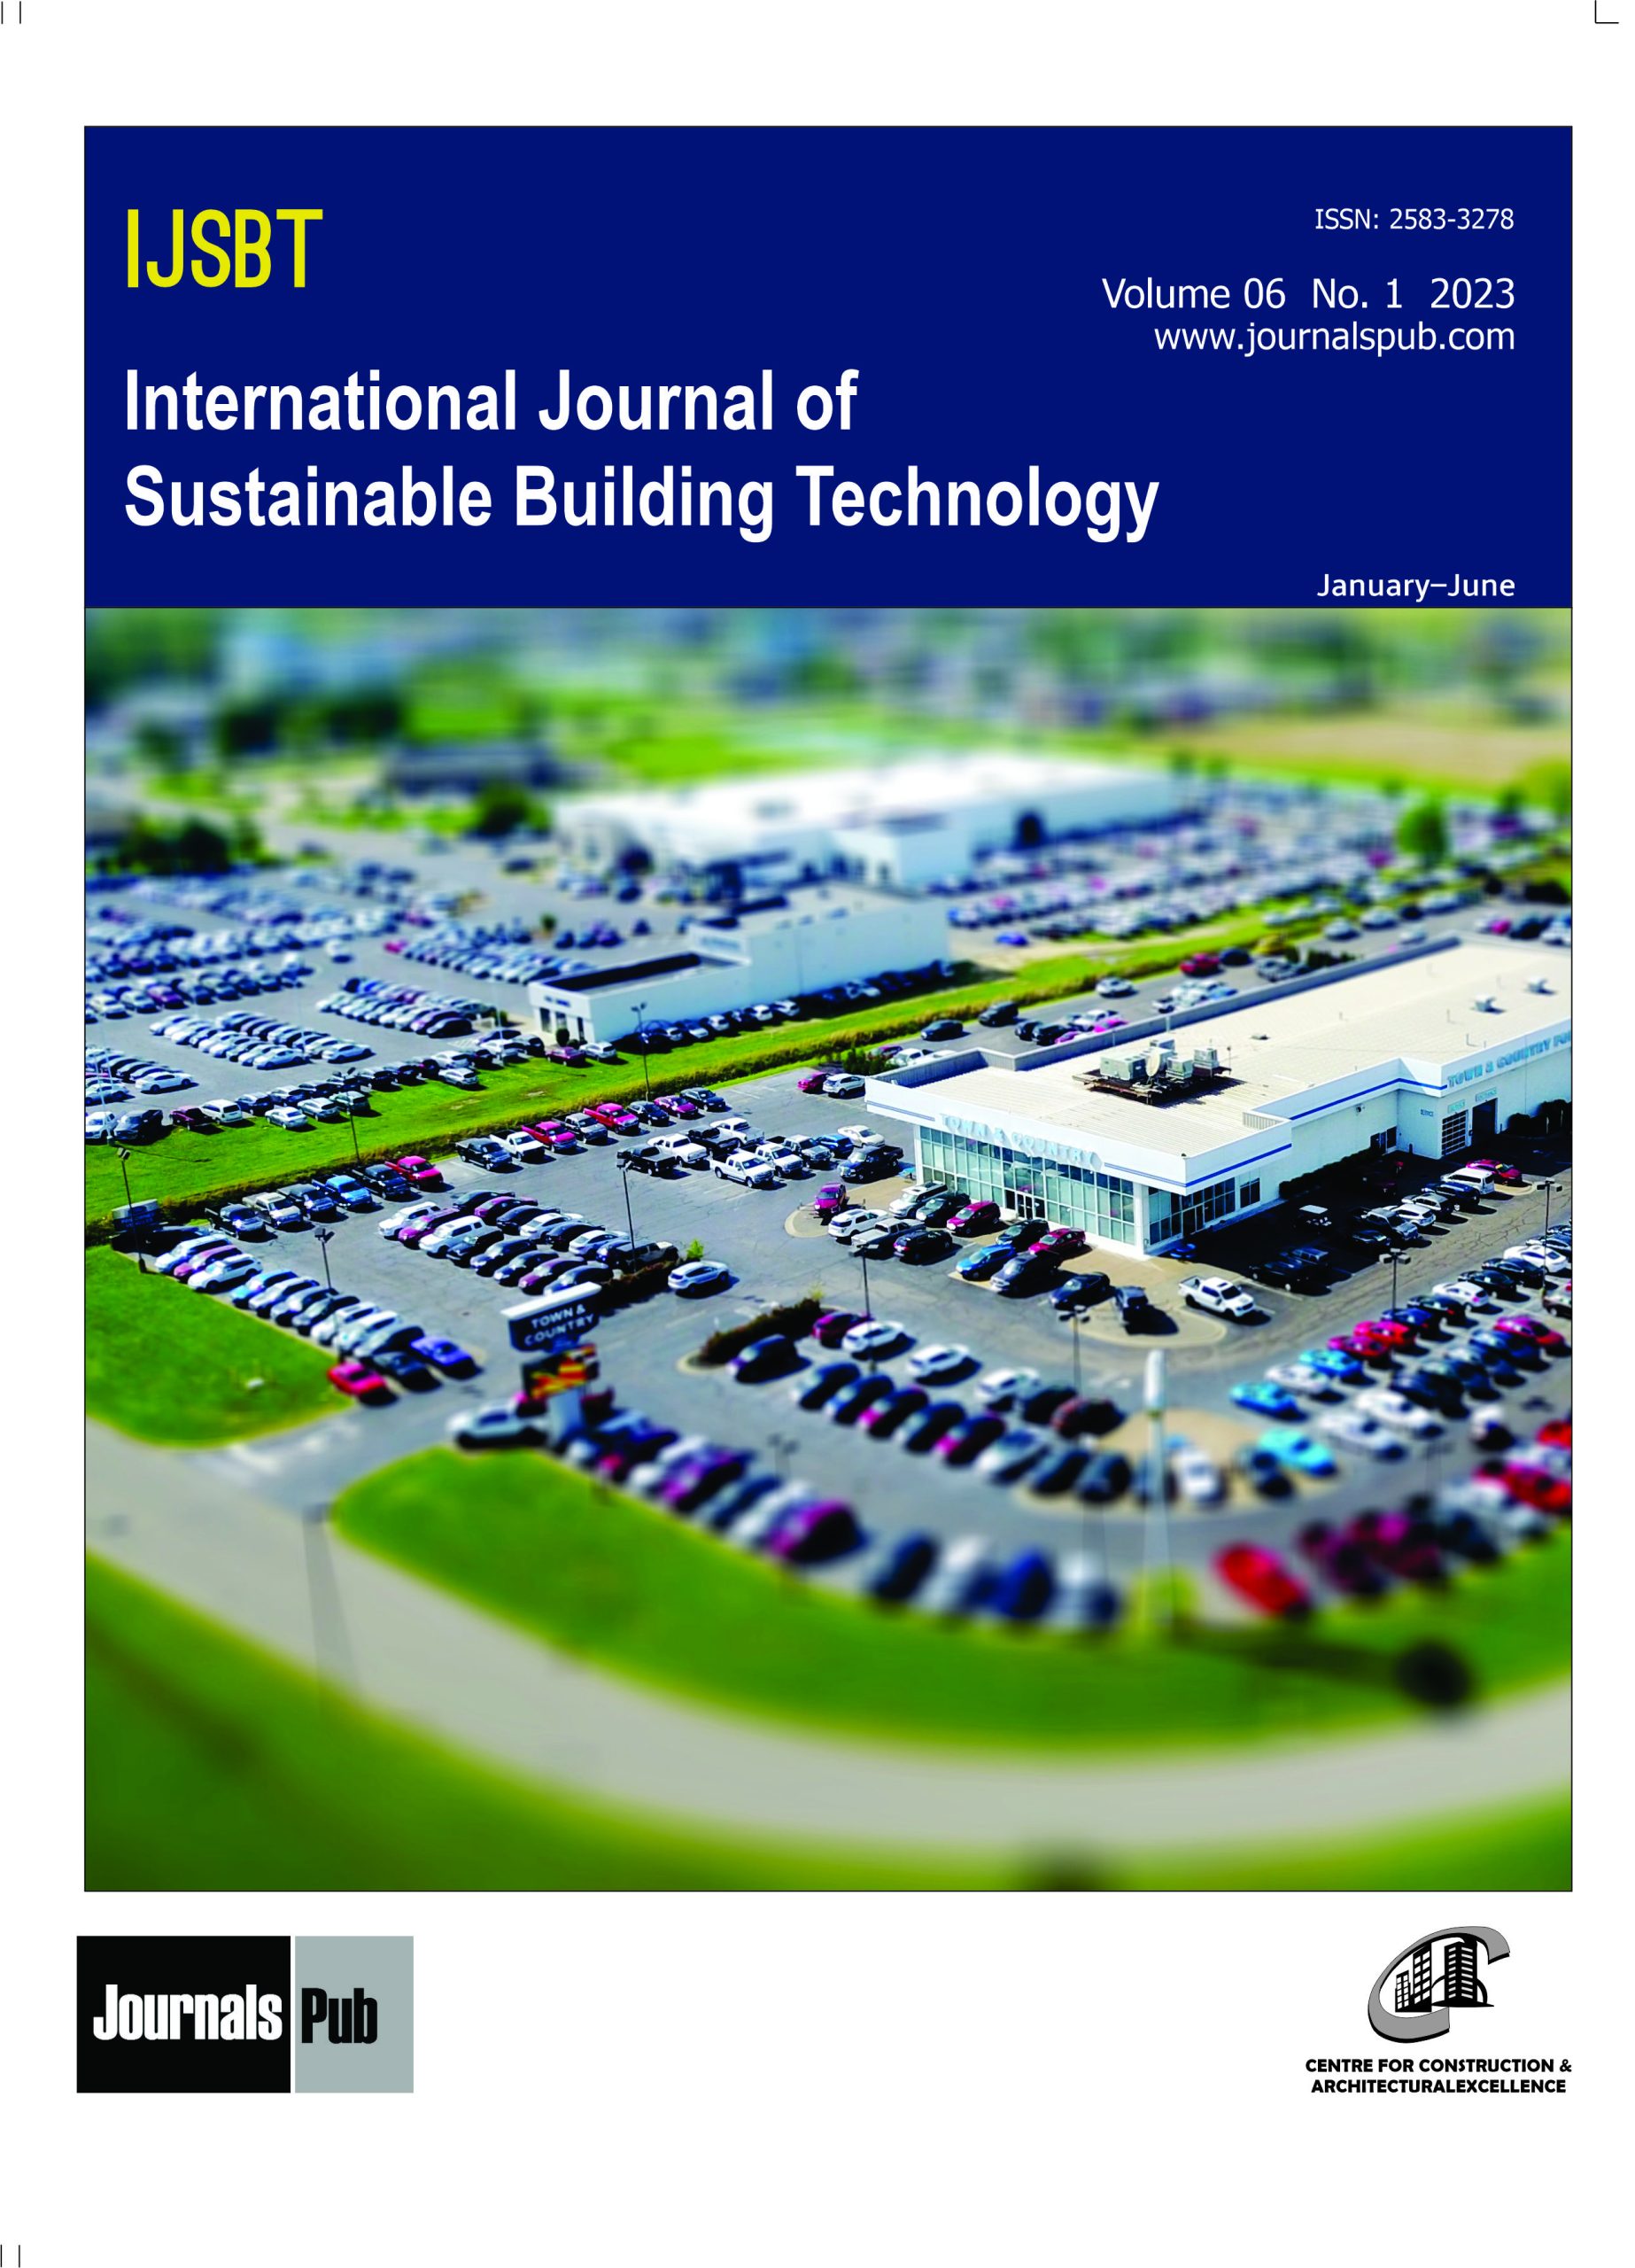 International Journal of Sustainable Building Technology Cover